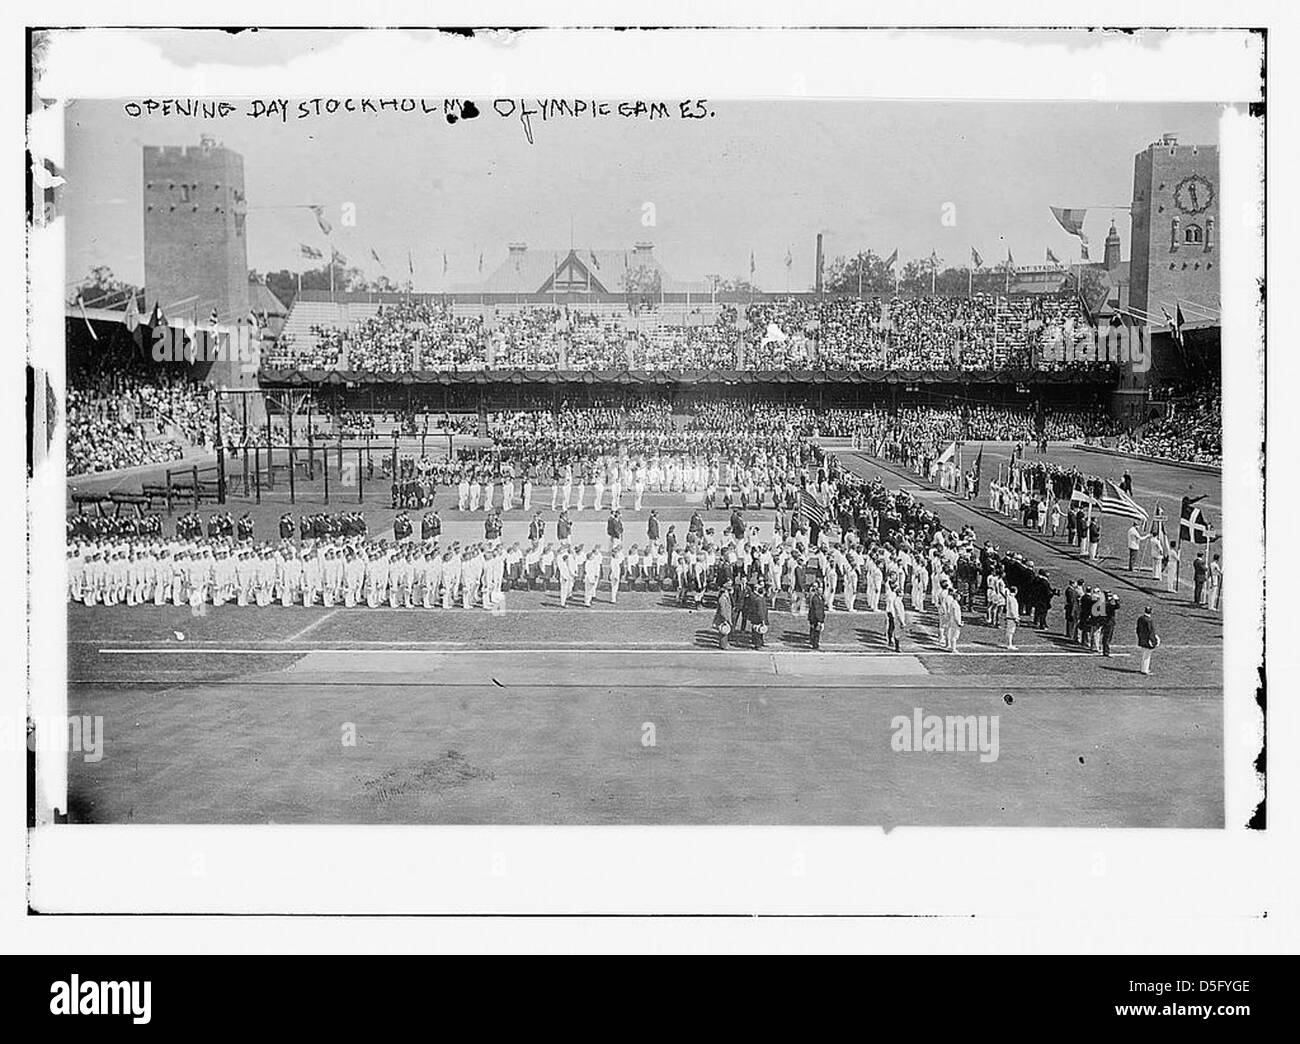 Opening Day, Stockholm Olympic Games (LOC) Stock Photo